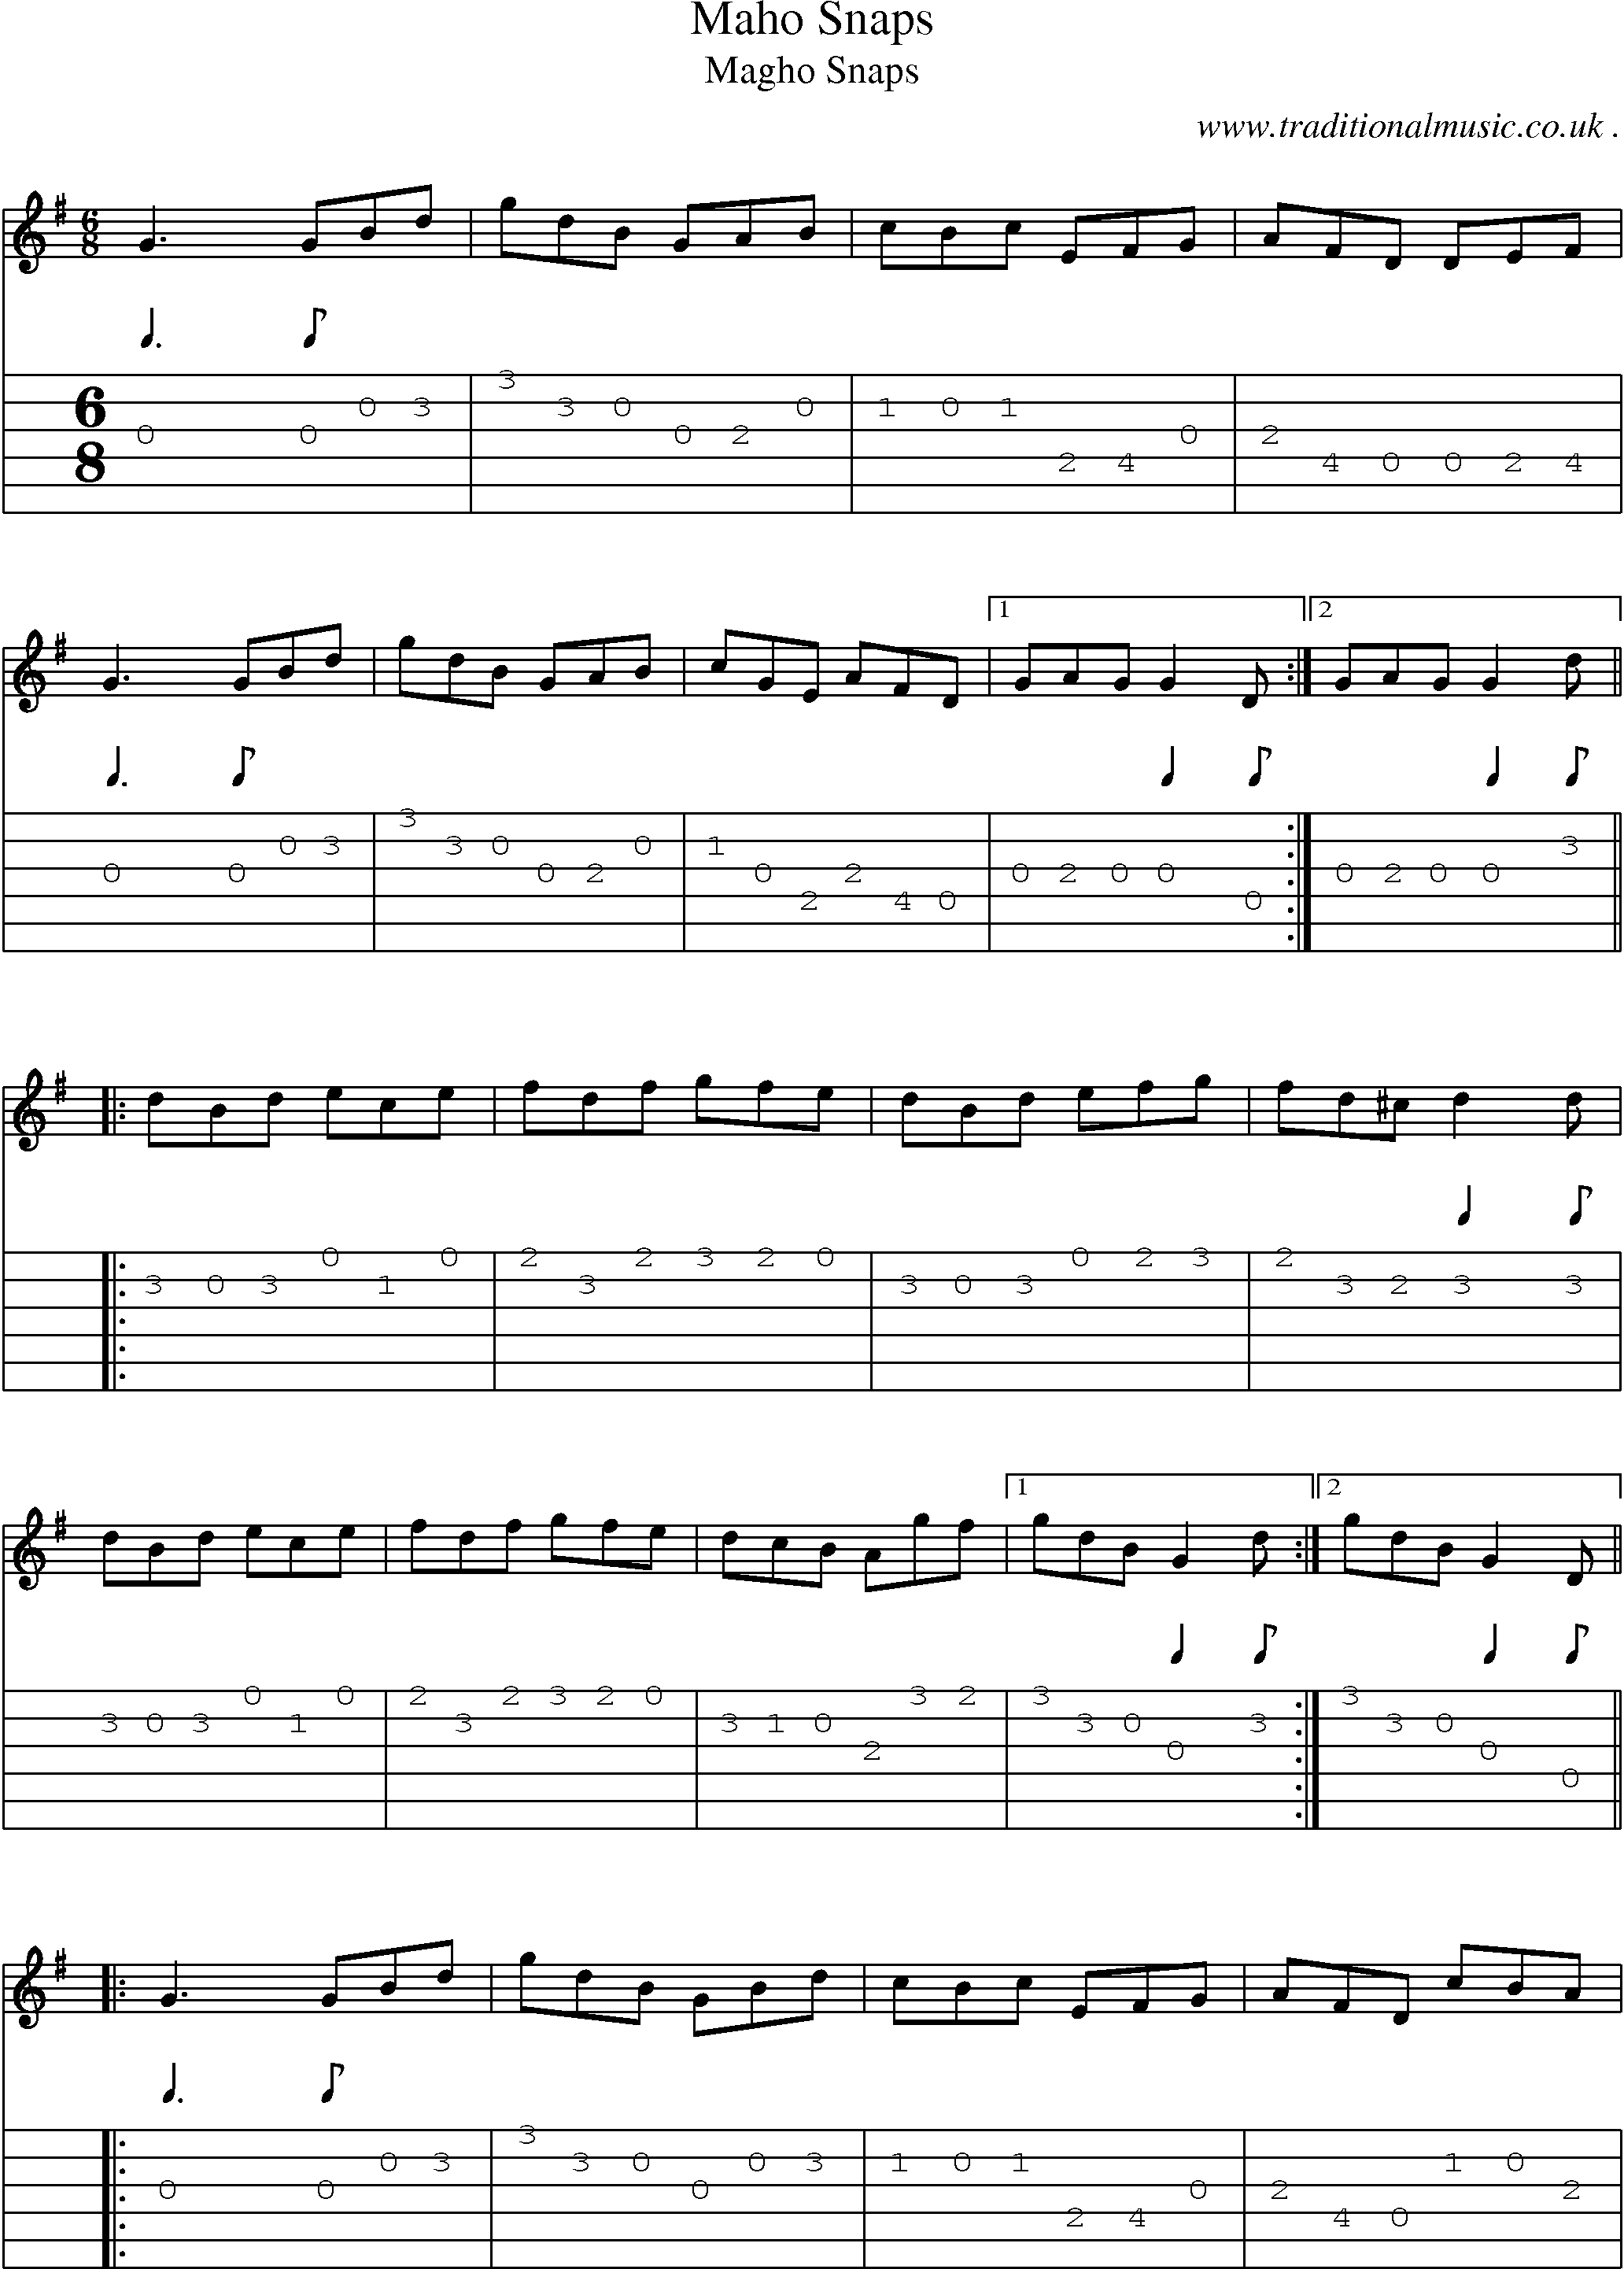 Sheet-Music and Guitar Tabs for Maho Snaps